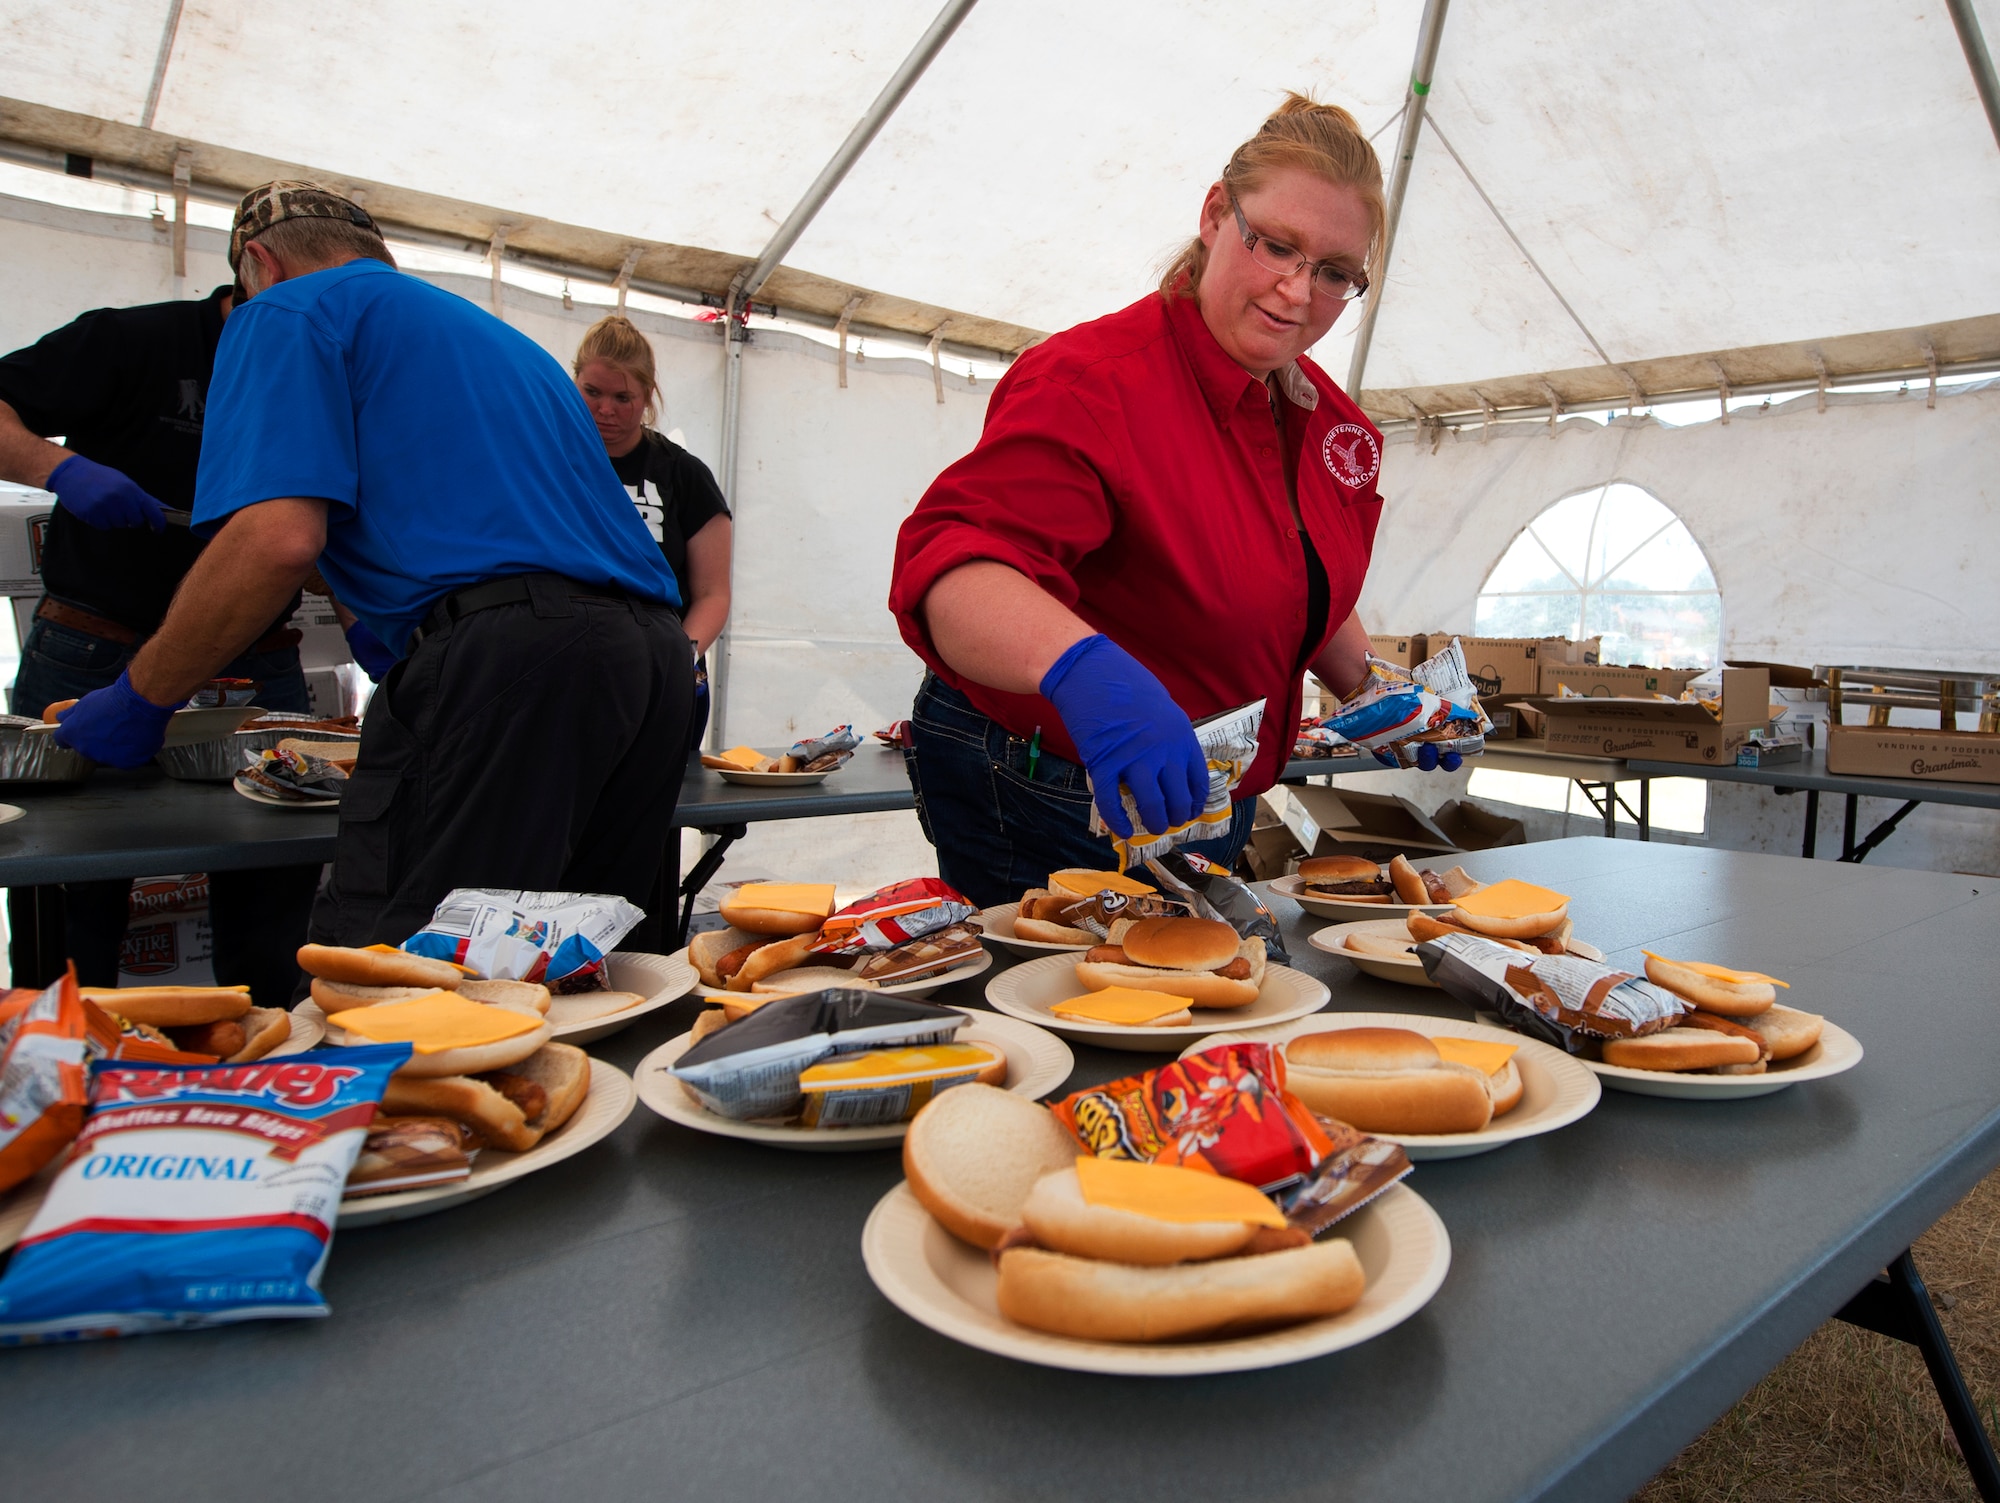 Christie Herron, a volunteer from the Chamber of Commerce's Military Affairs Committee, prepare plates of burgers, hot dogs and chips for the 90th Missile Wing Airmen, and their families, taking part in the annual Frontiercade on F.E. Warren Air Force Base, Wyo., Aug. 21, 2015. Frontiercade is meant to give F.E. Warren Airmen and their families a day of games, sports and free food before the start of the new school year. (U.S. Air Force photos by R.J. Oriez/Released)